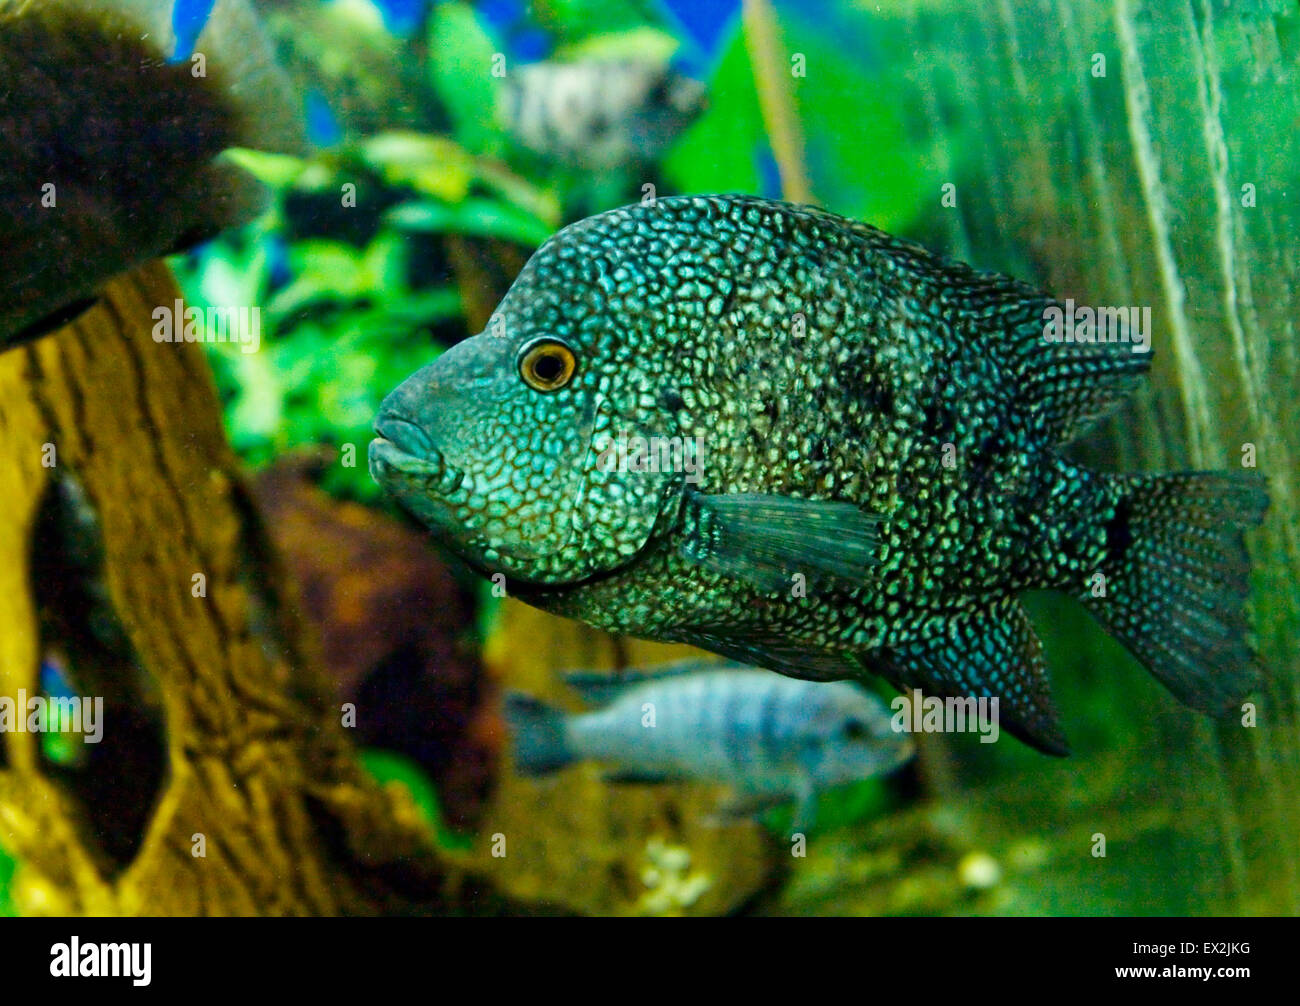 Tropical fish Chichlidae parachromis managuensis, lives in Africa and Latin America. Stock Photo